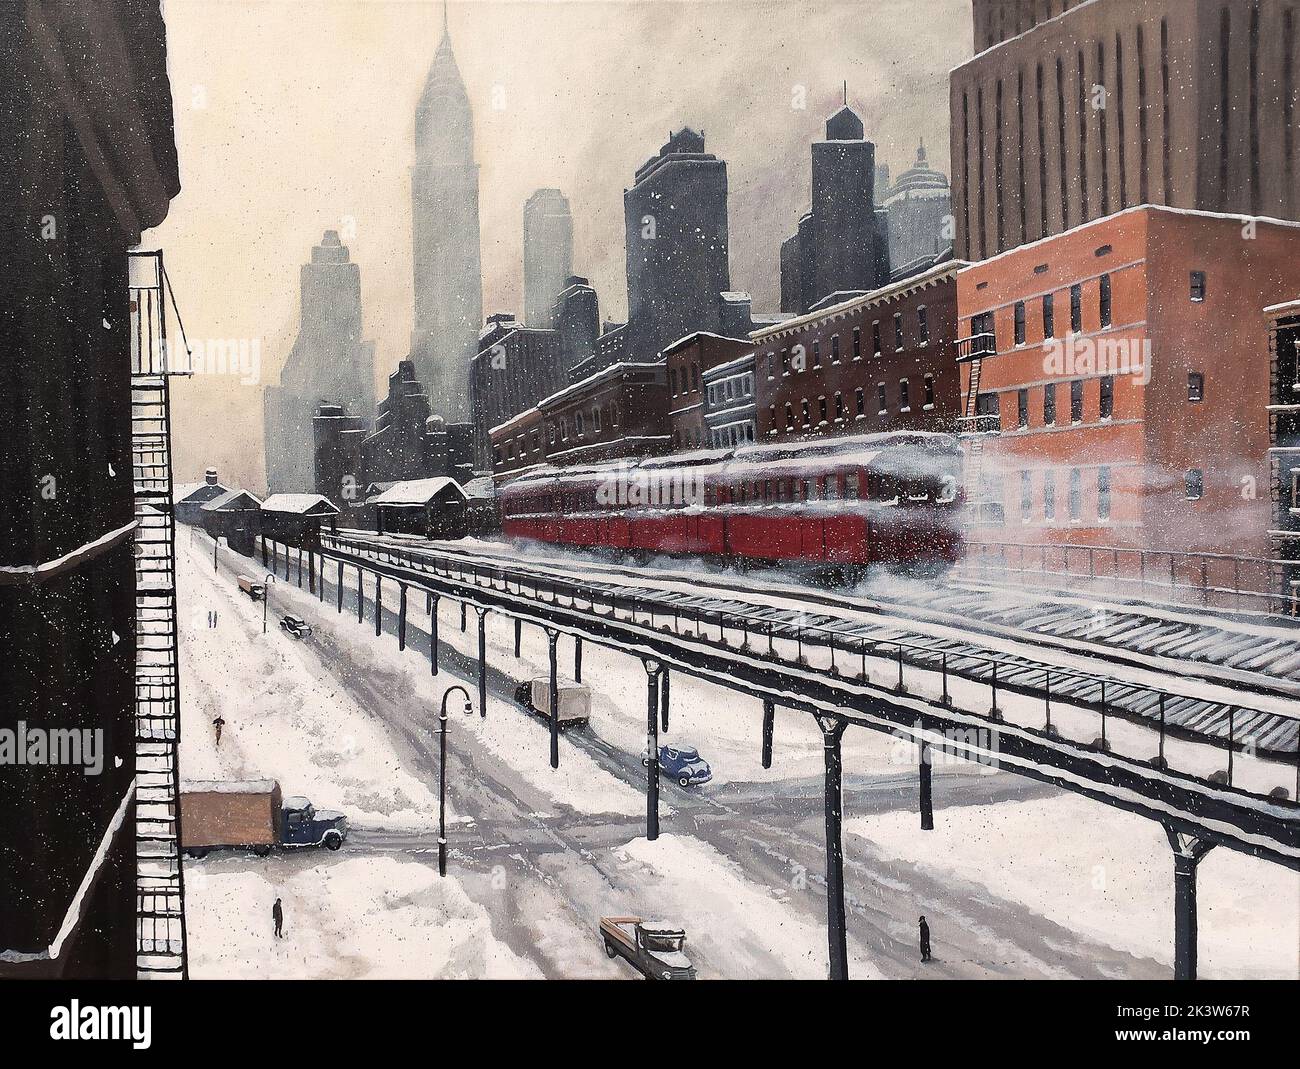 The Third Avenue El train travels towards downtown Manhattan on a snowy winter day in this vintage scene. Stock Photo